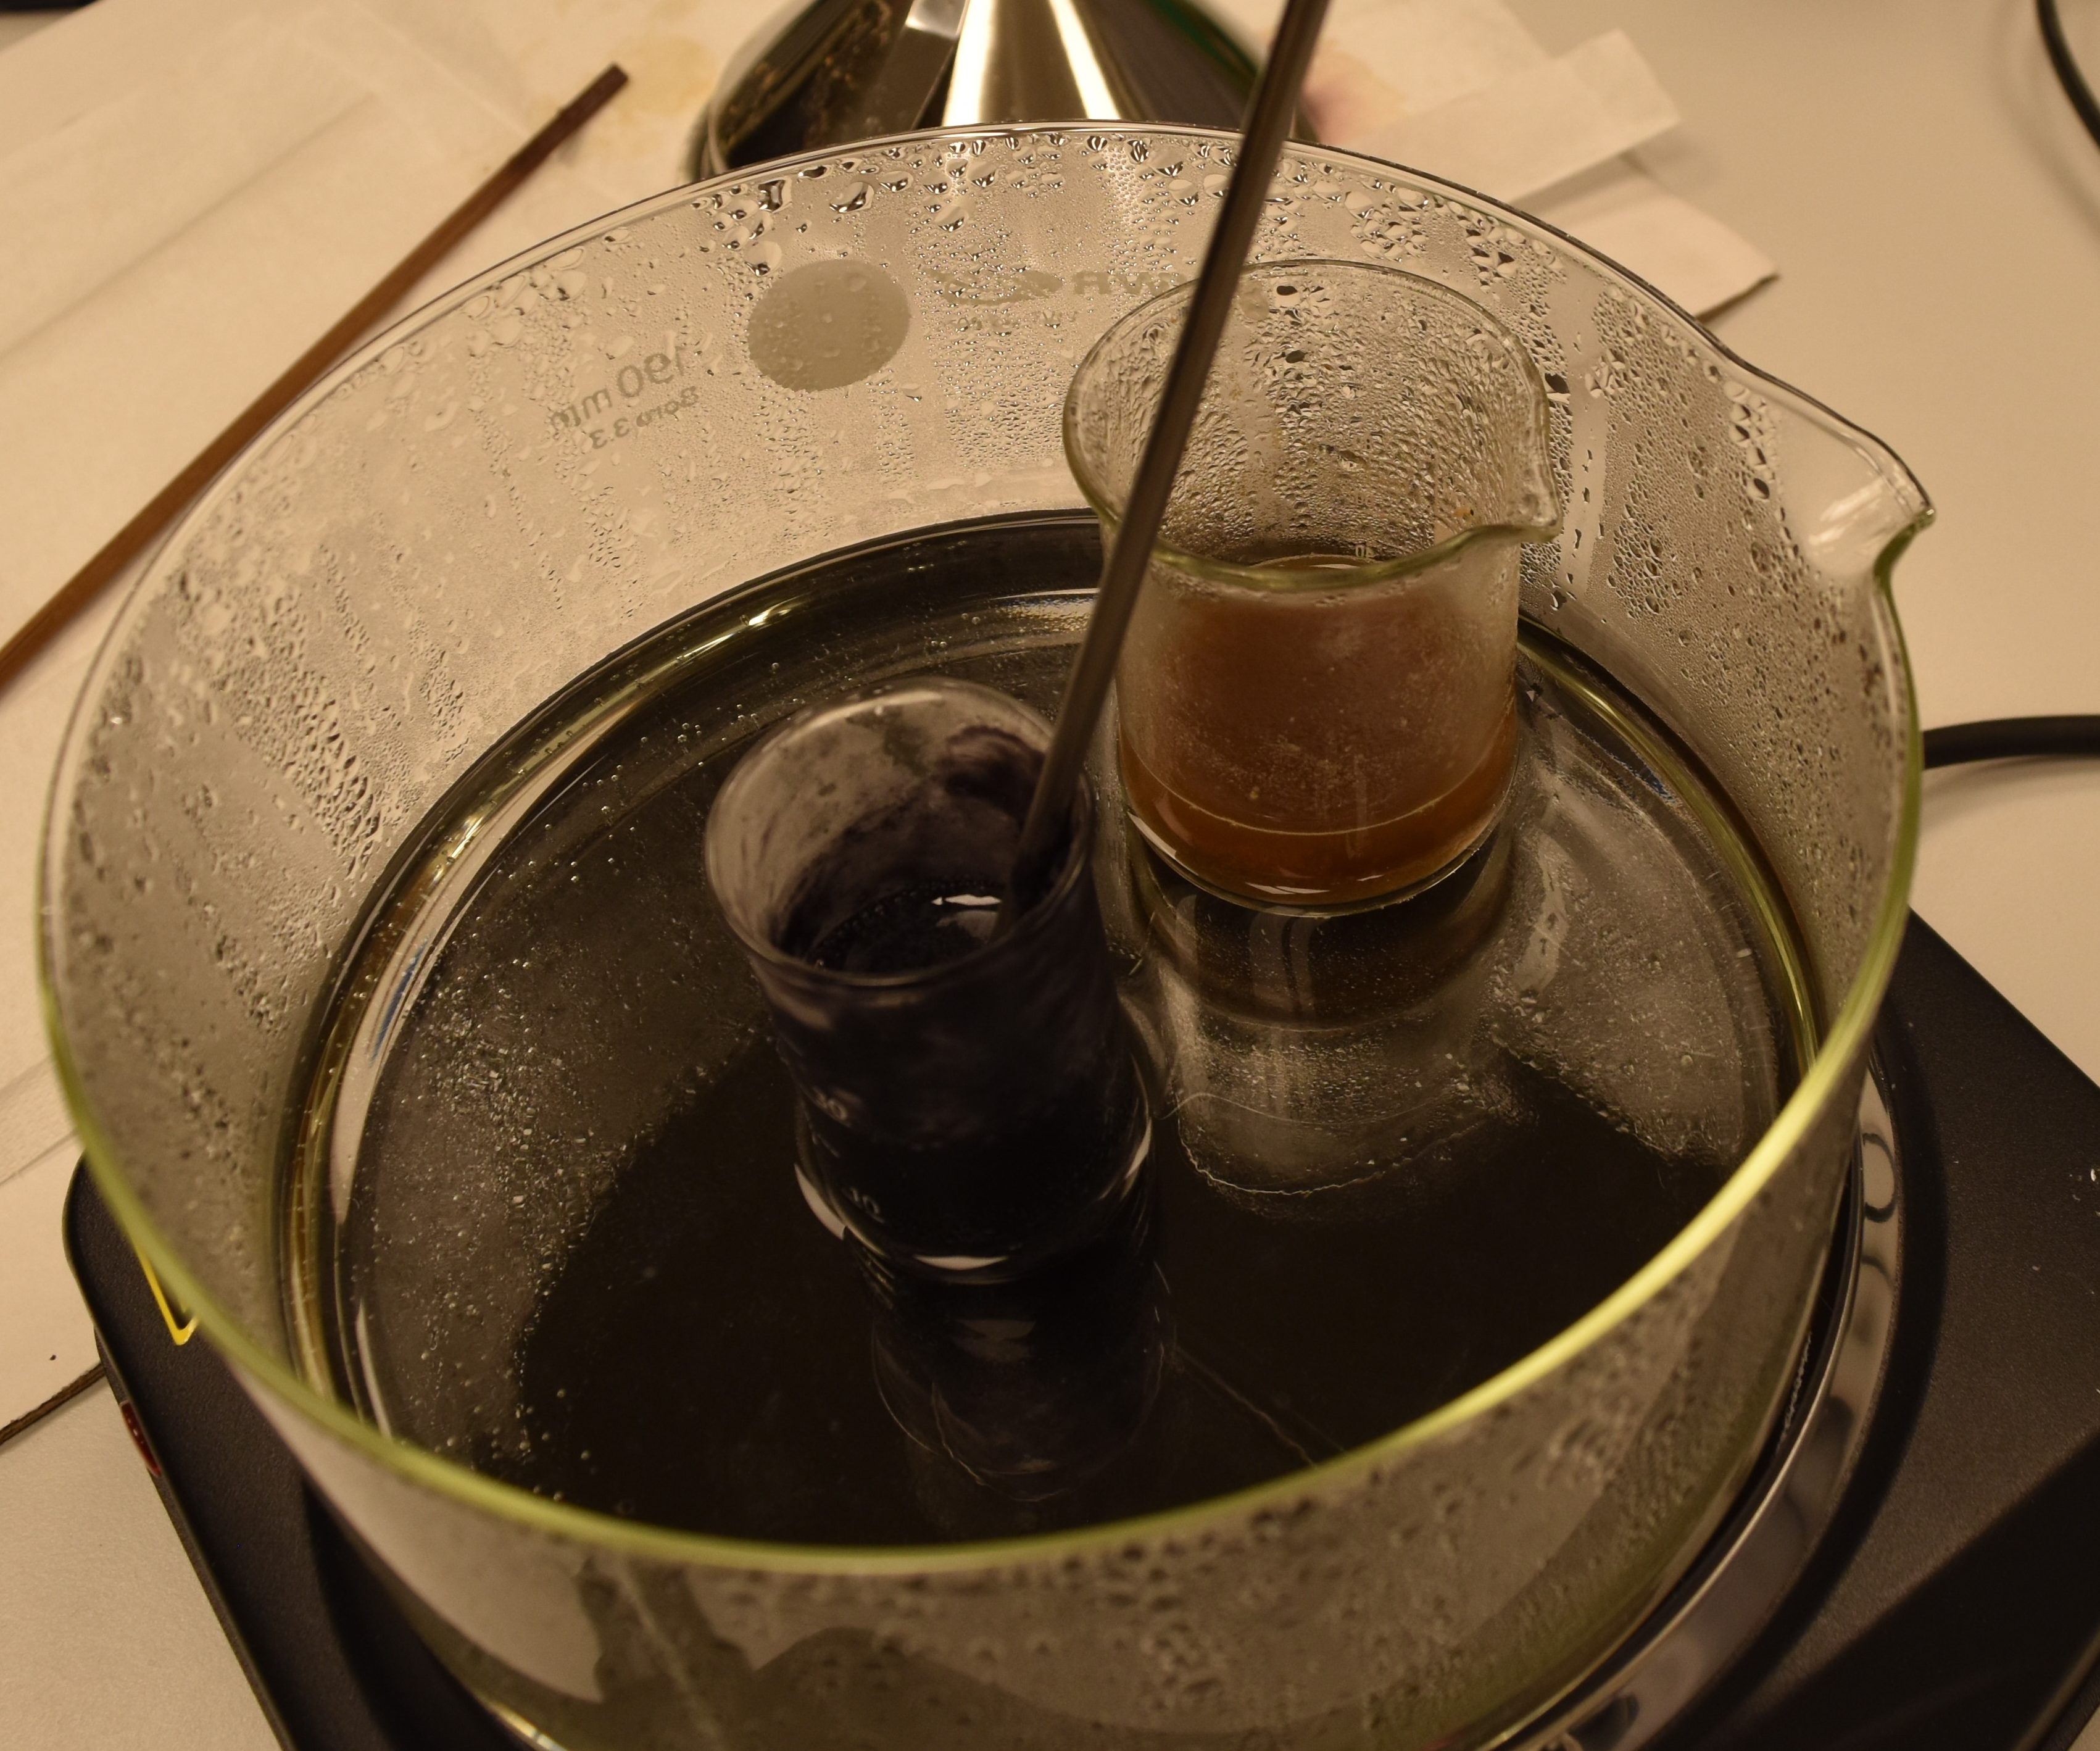 The pitch black of the final iron-gall ink vs. the brown colour of the extract in water before the addition of vitriol. 